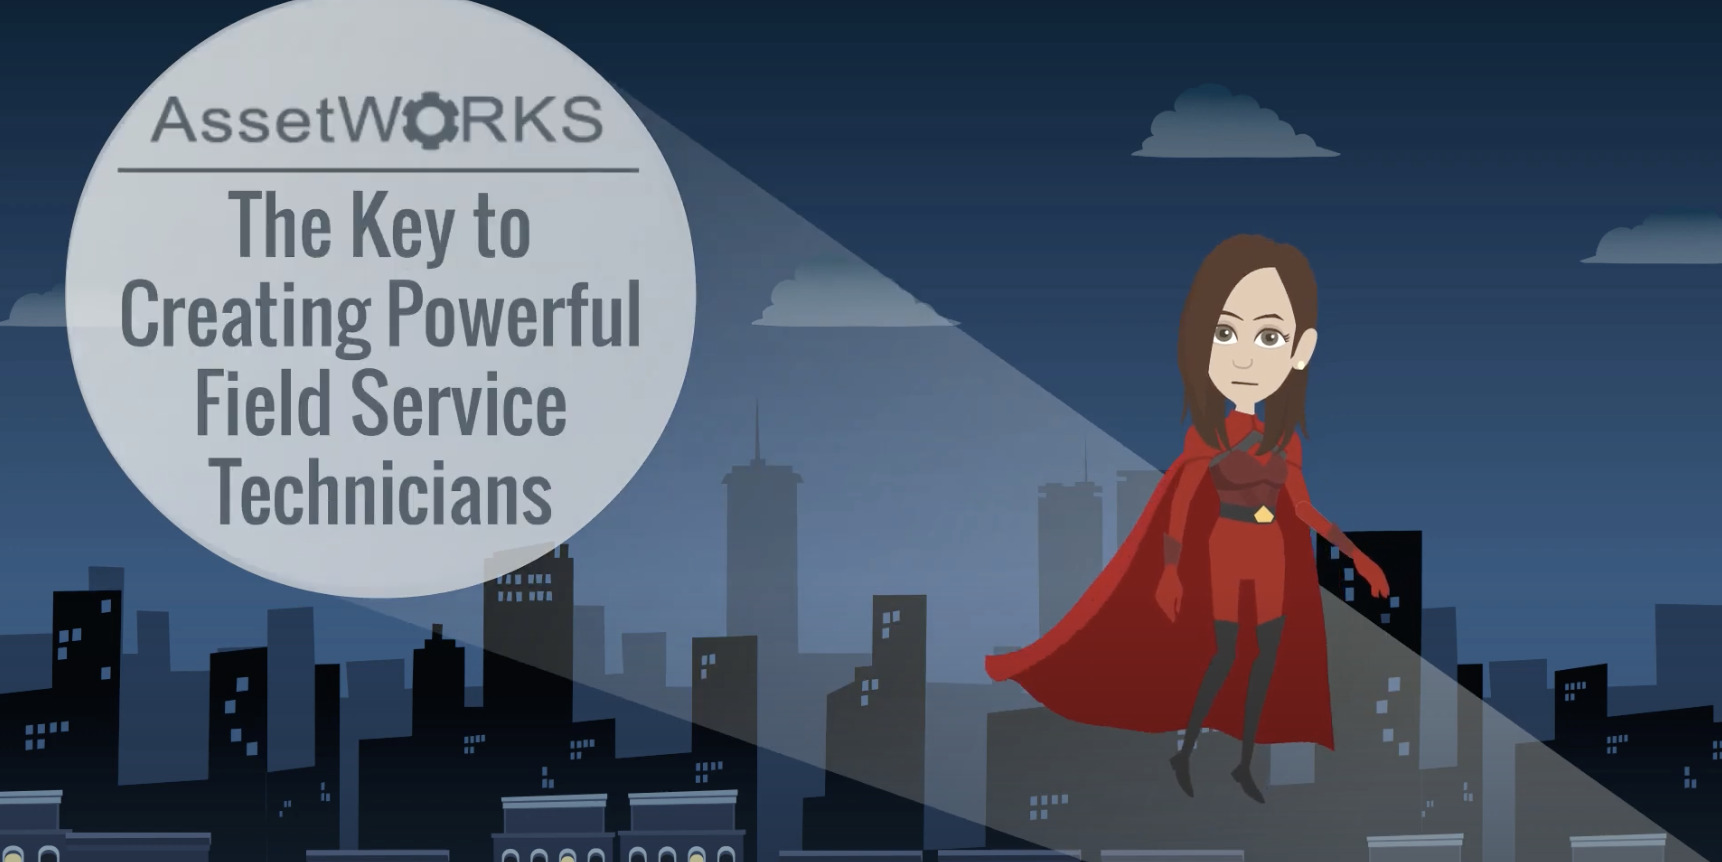 The Key to Creating Powerful Field Service Technicians